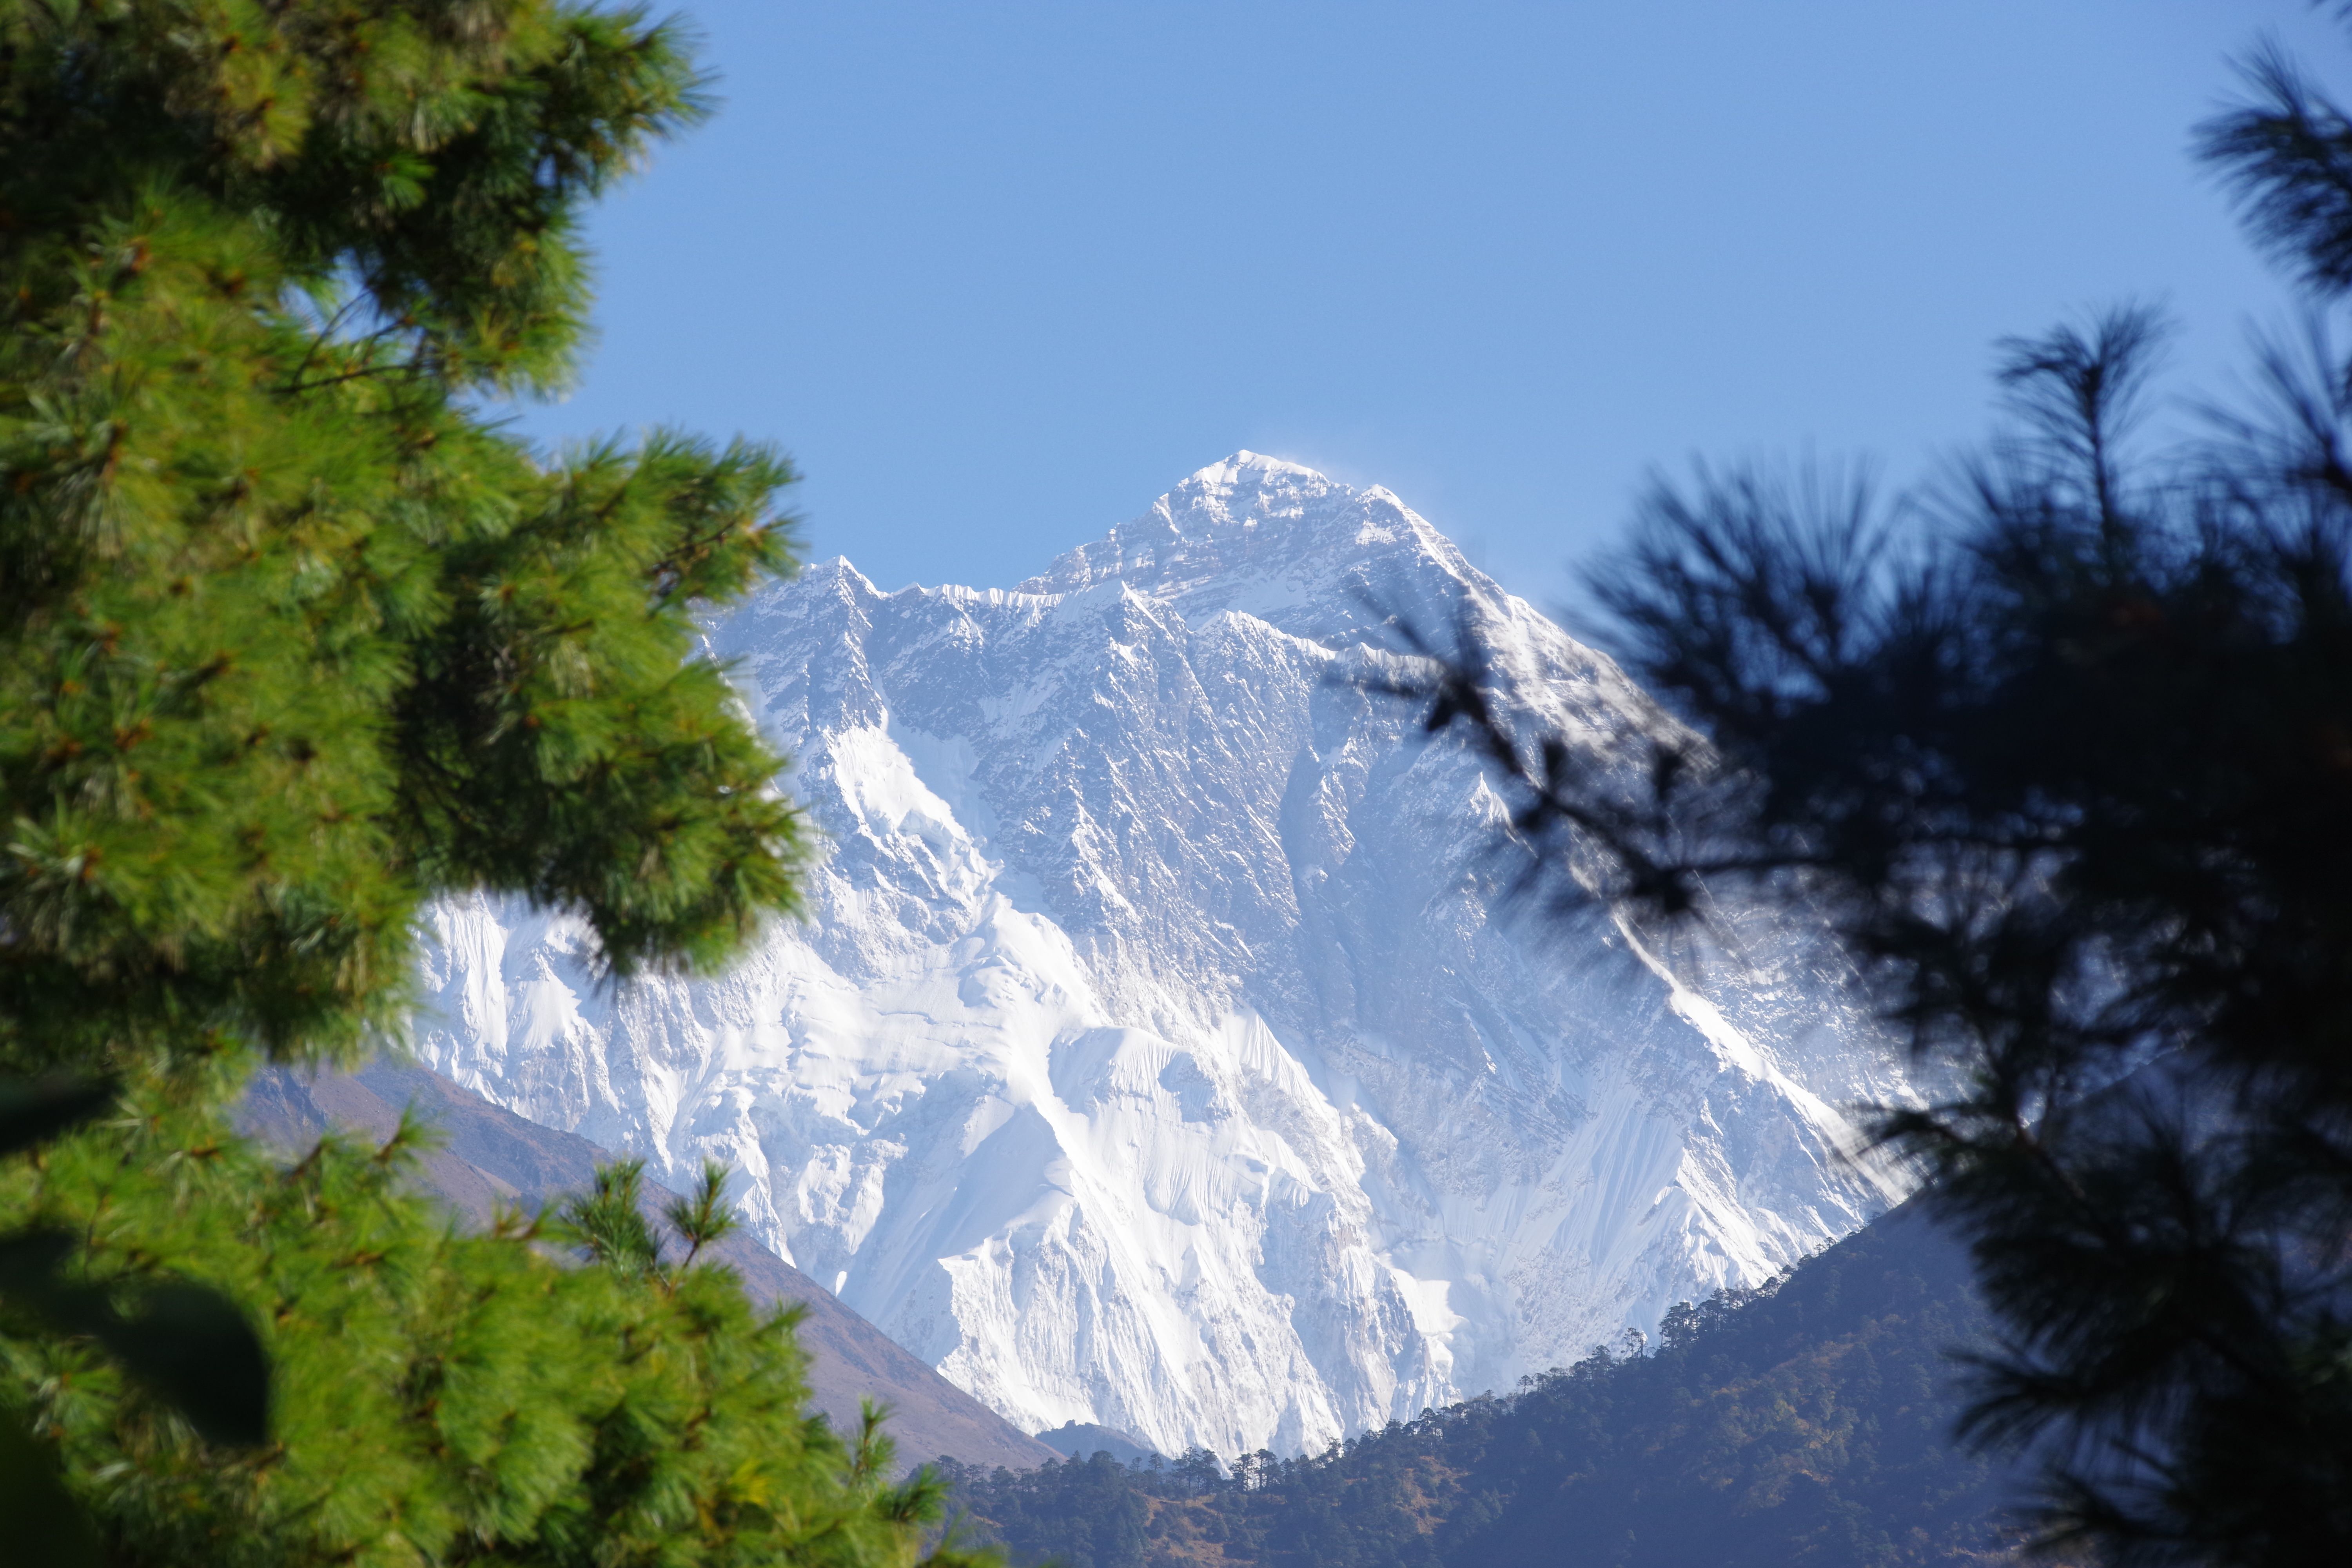 Mountain views from along the trek to Everest Base Camp